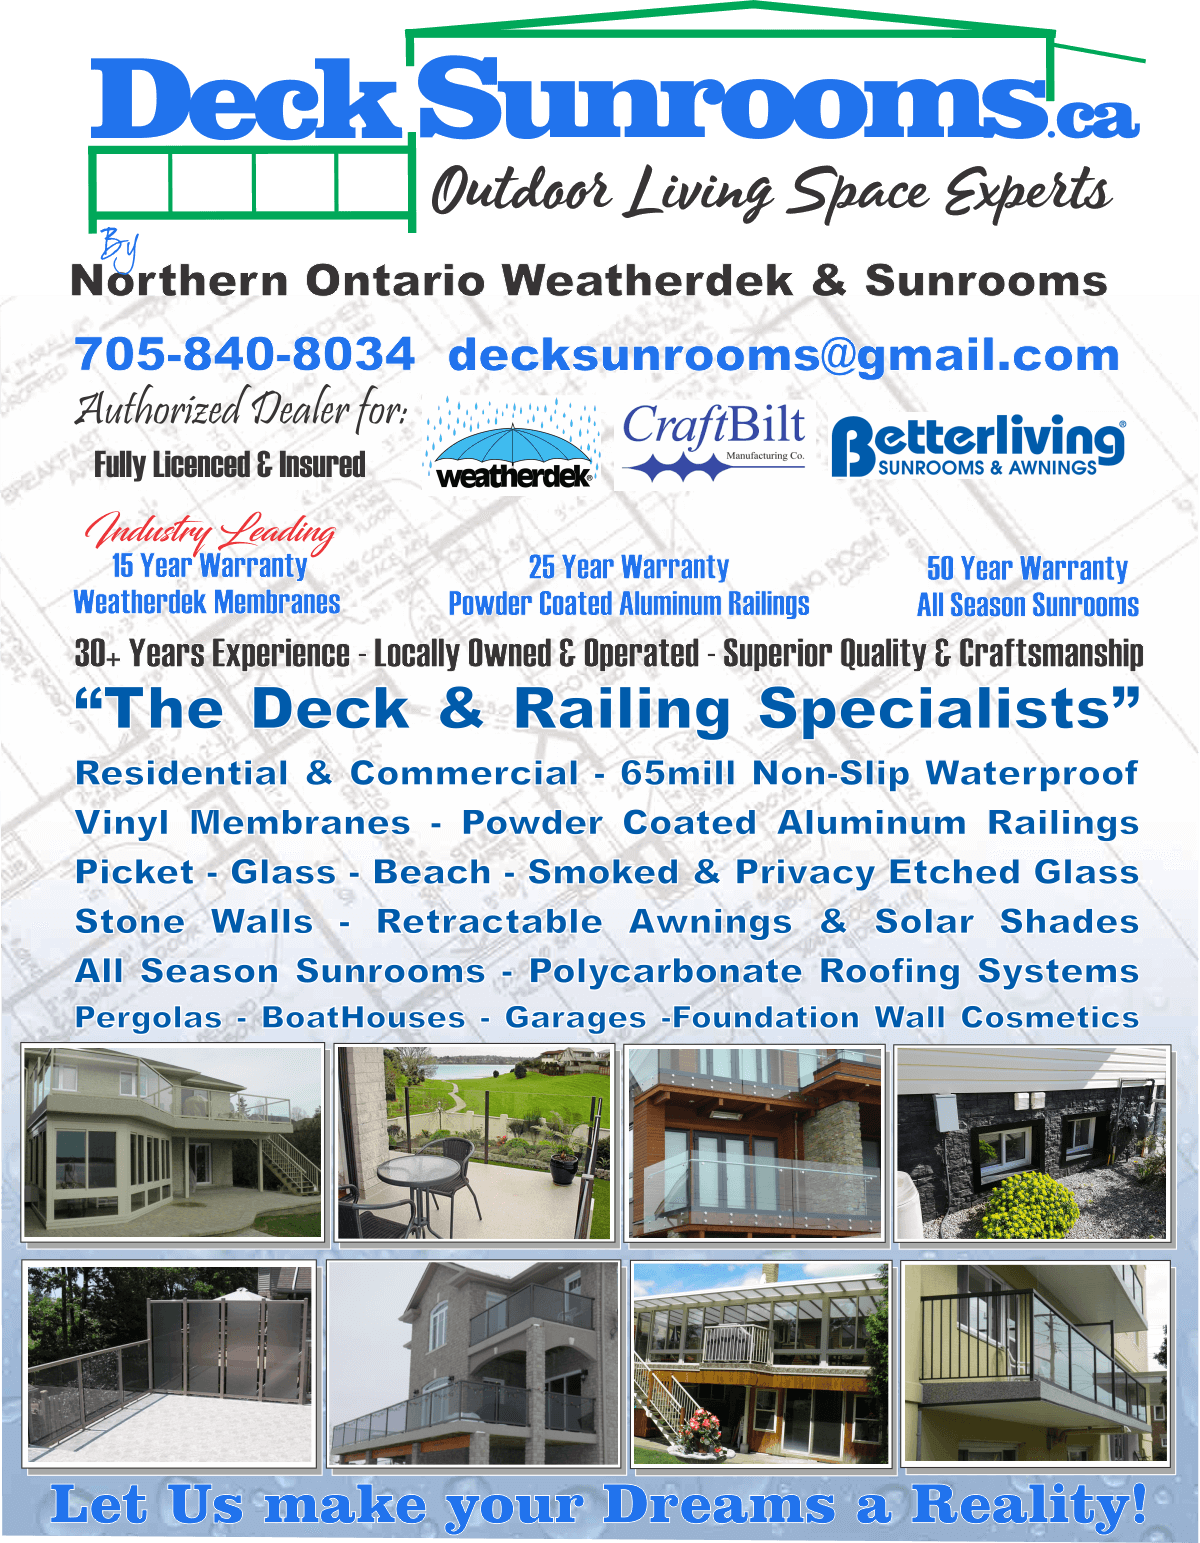 Print Design, Print Collateral by Effective Marketing, www..decksunrooms.ca flyer.